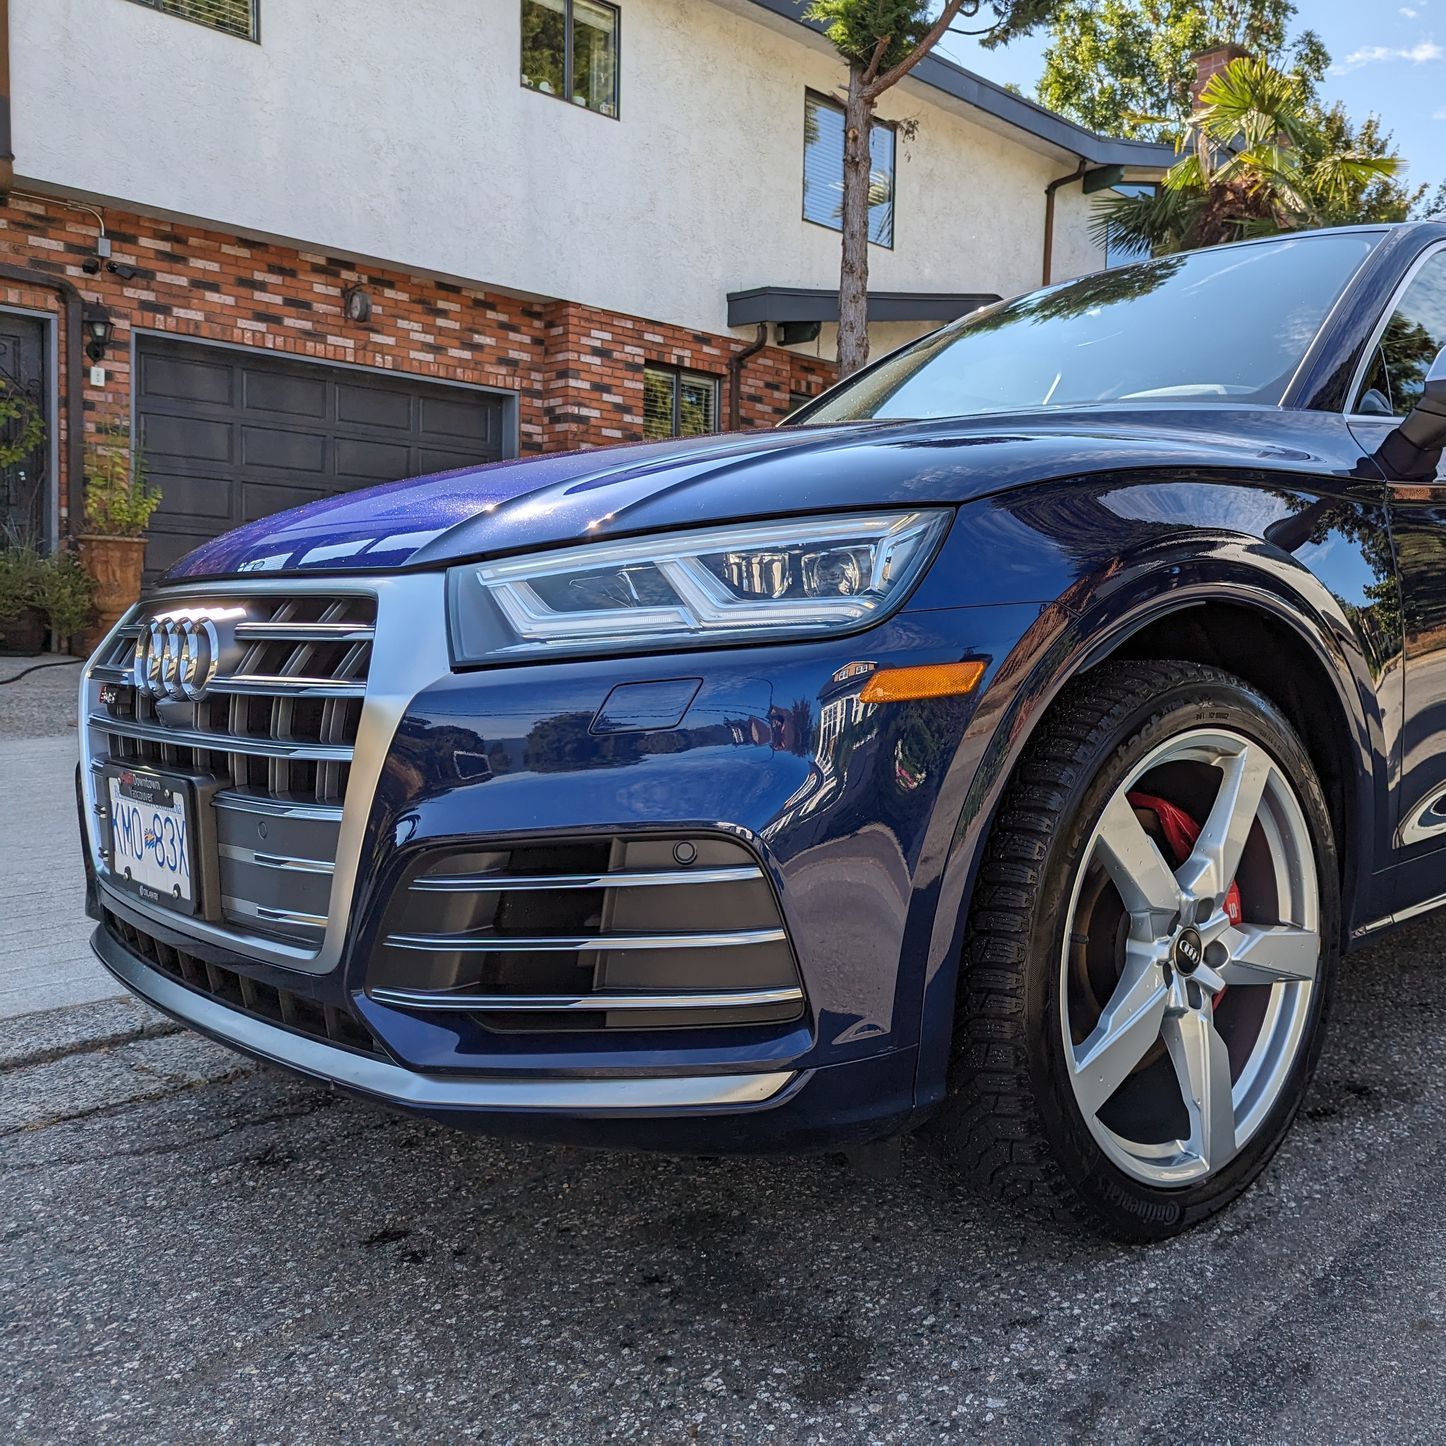 a blue audi q5 is parked in front of a brick house .